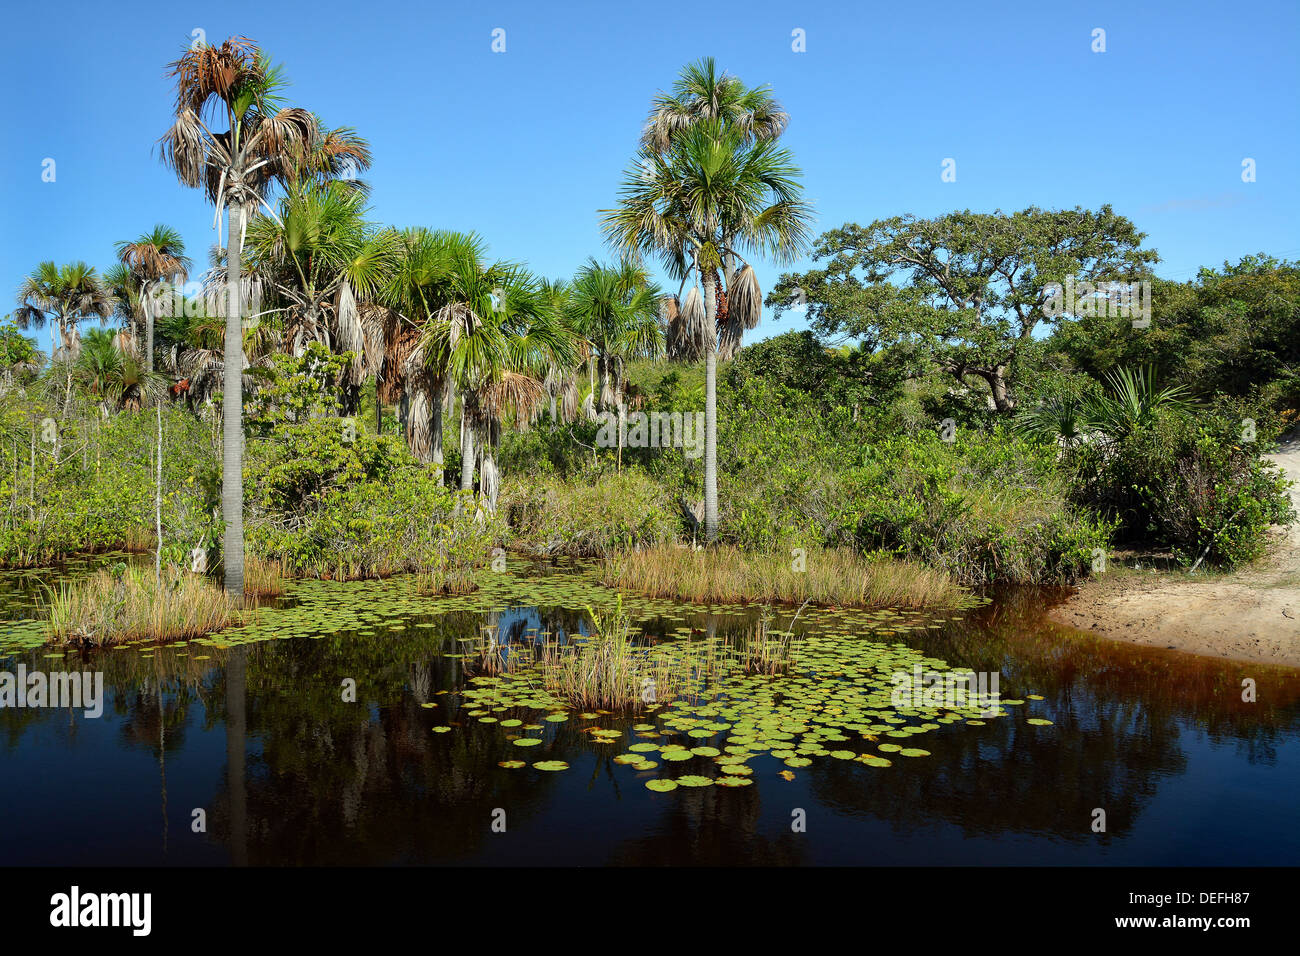 Palm trees and water lilies in the river delta of Rio Parnaíba, Parnaiba, Piauí, Brazil Stock Photo